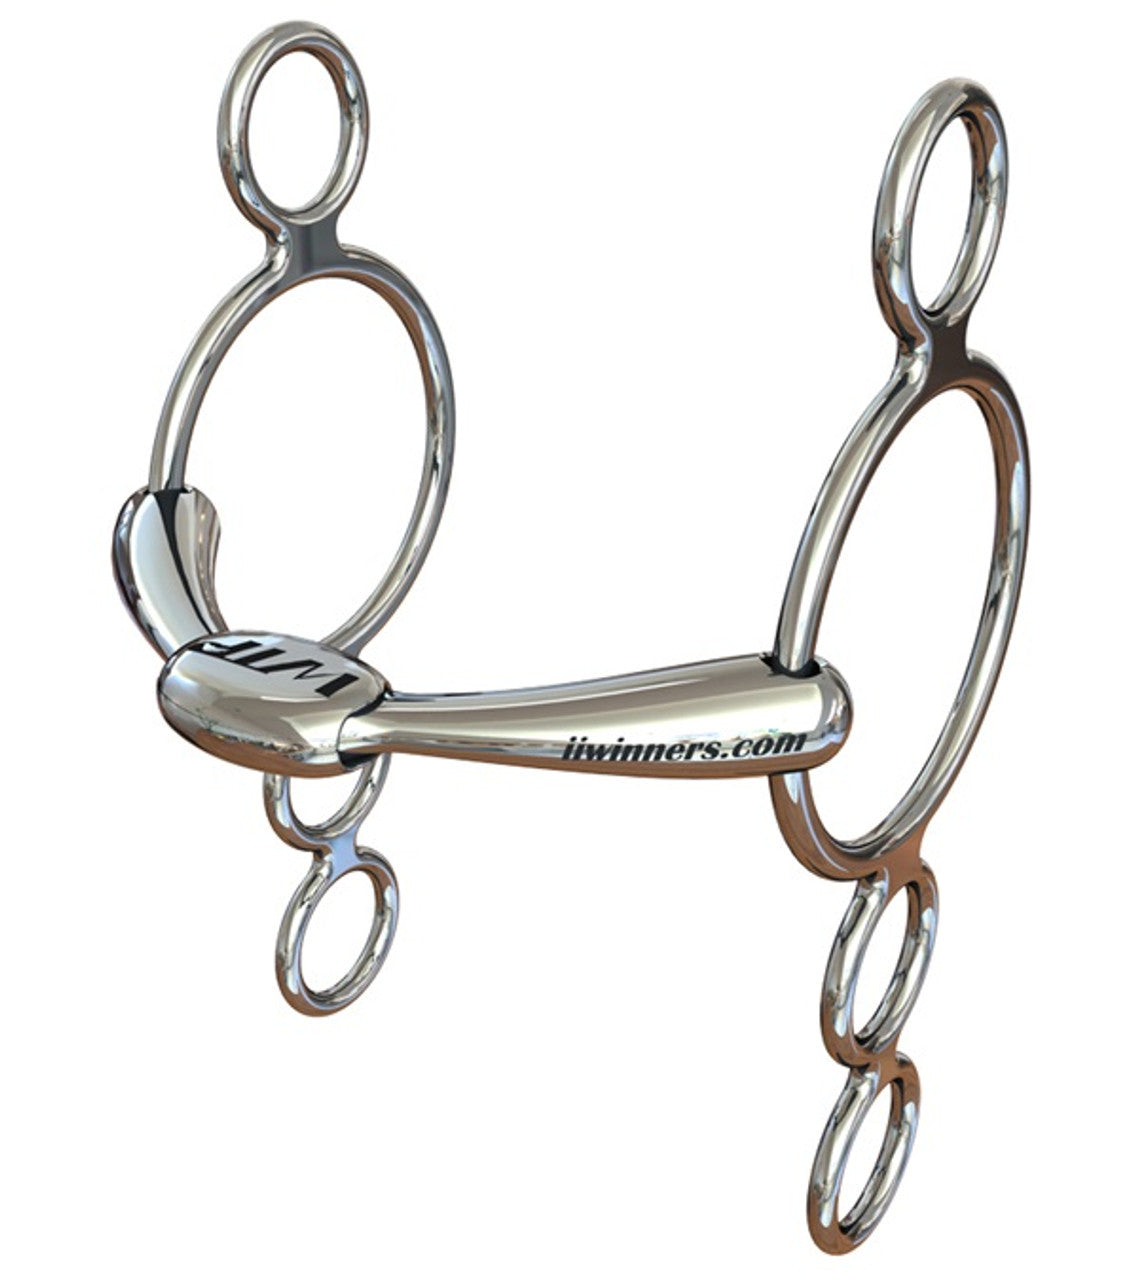 WTP (Winning Tongue Plate) 4 Ring Elevator Leverage Bit with Normal Plate-TexanSaddles.com